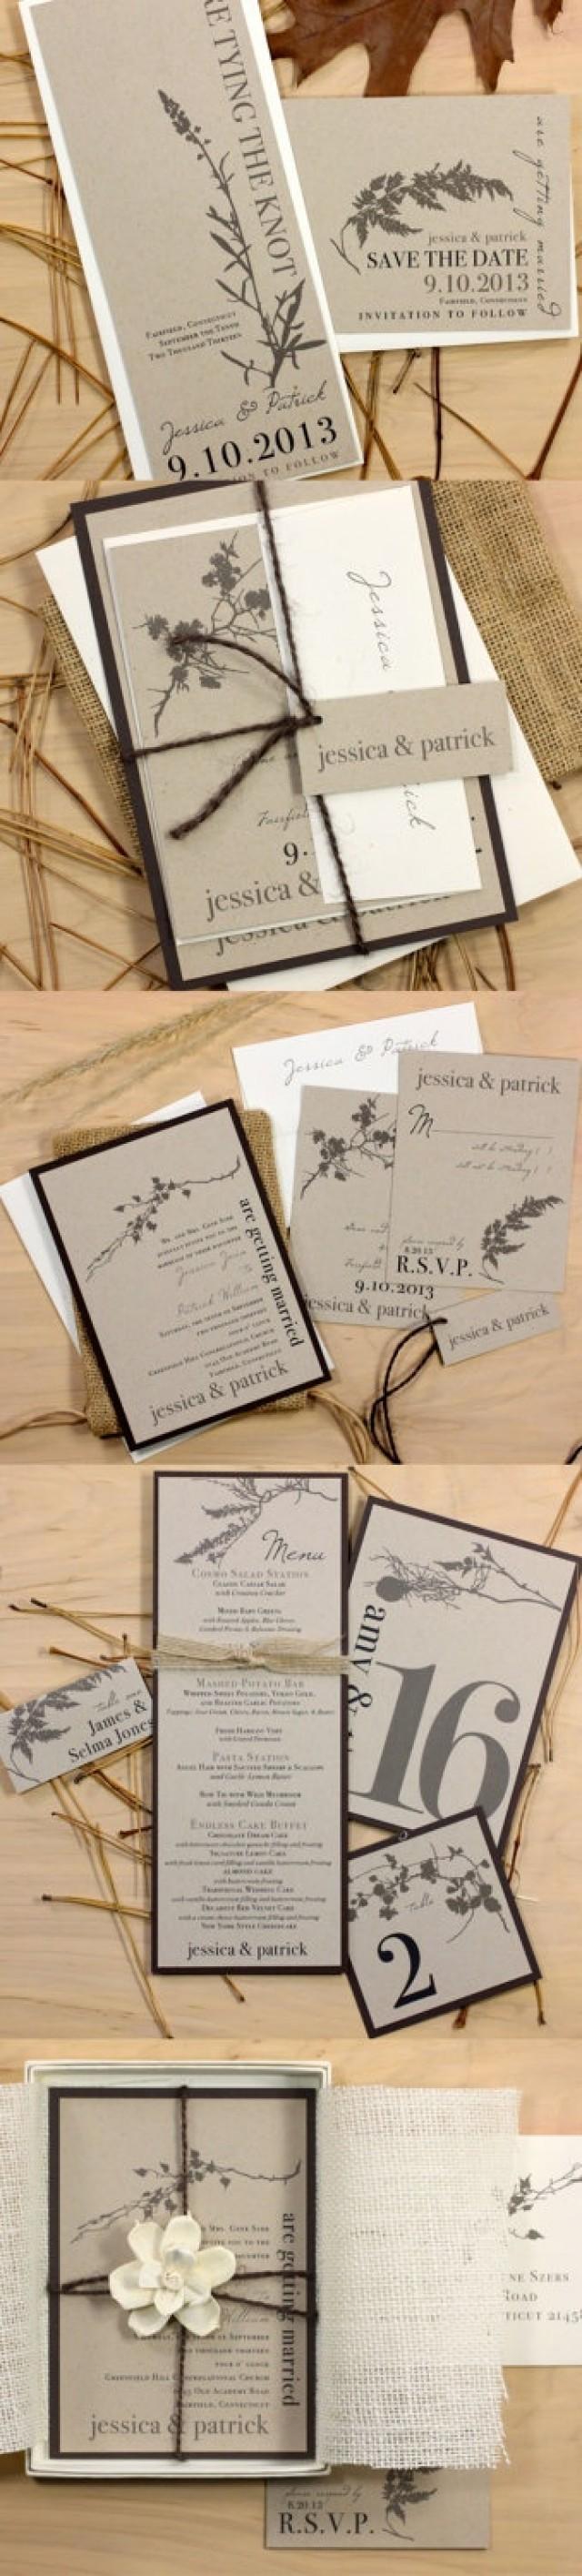 Rustic & Chic, Eco Friendly Wedding Save The Dates, Elegant Chic, Custom And Unique Save The Dates - "Ivory Romance" Save The Date Deposit